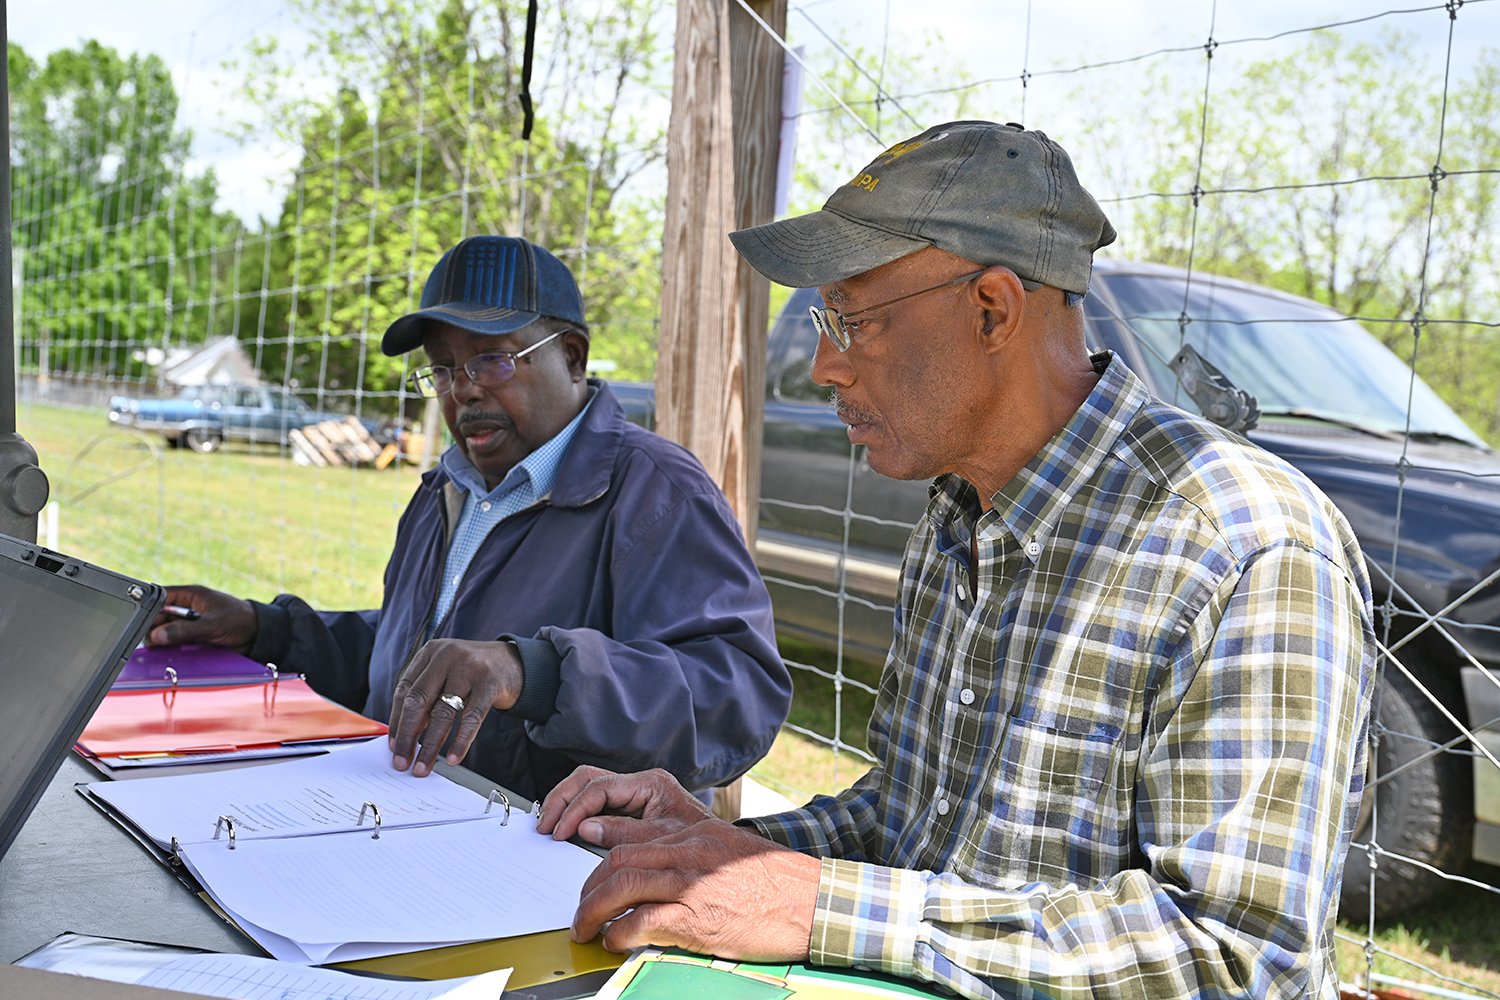 John E. Simmons (left), a Good Agricultural Practices (GAP) consultant, reviews paperwork with Robert Taylor (right),owner of Tilford Farms, during a GAP audit on Taylor’s farm in Houston County, Georgia.